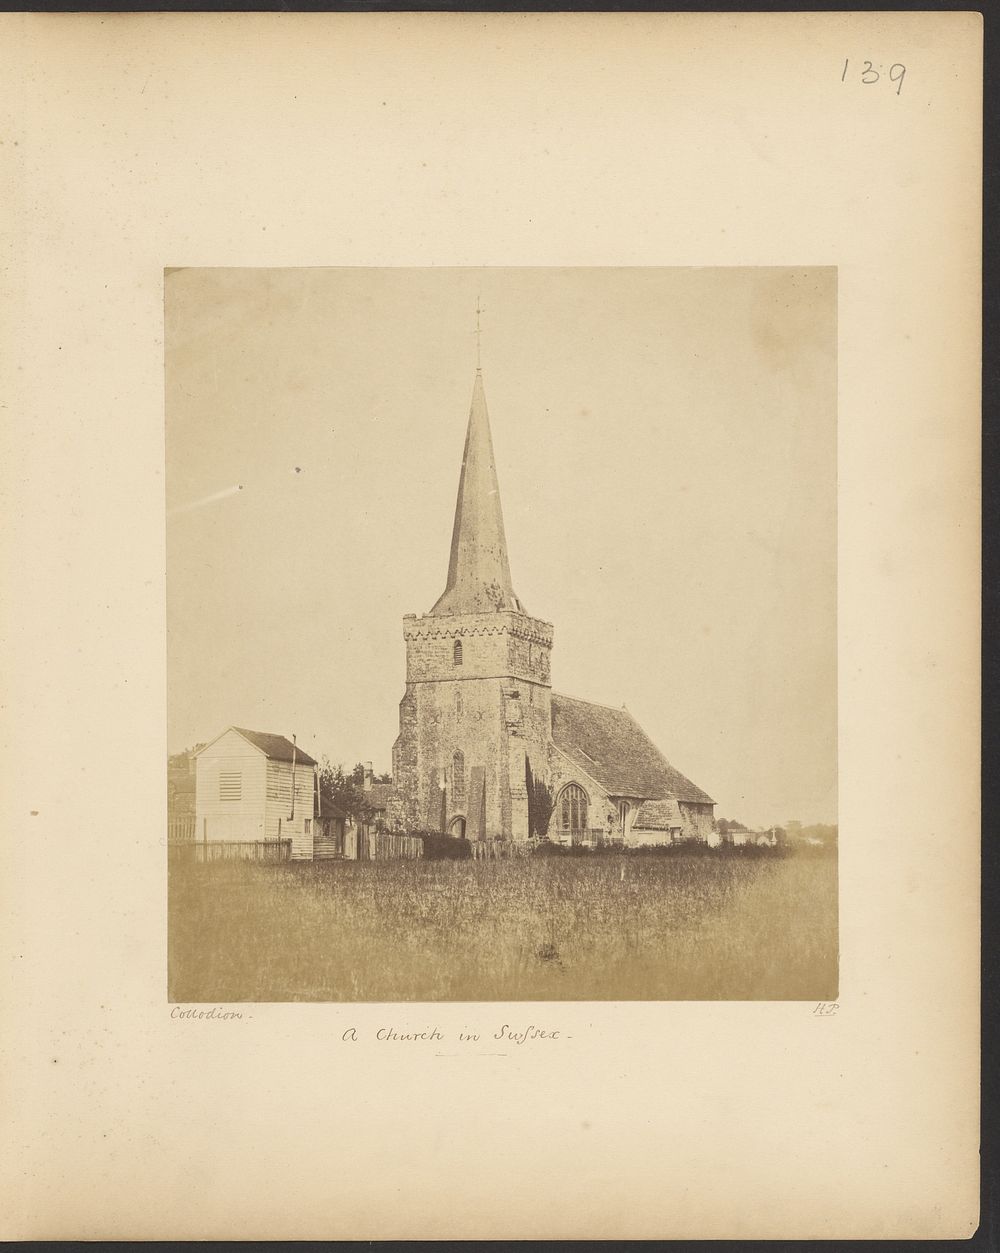 A Church in Sussex by Henry Pollock